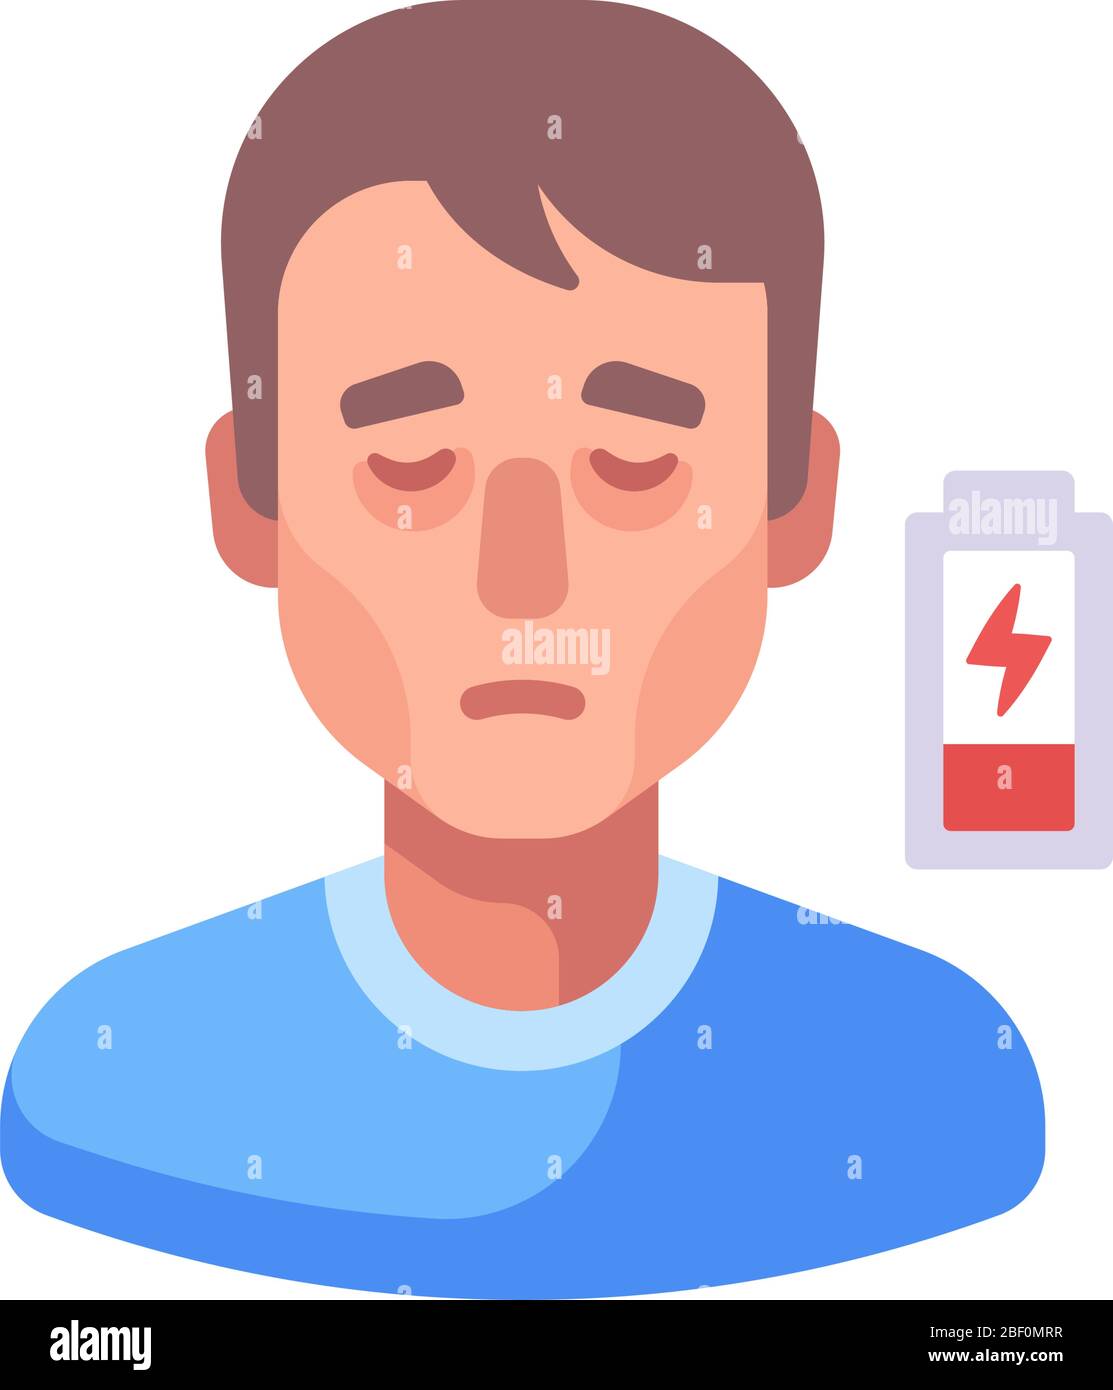 Low energy icon. Fatigue flat illustration. Man feeling tired and sleepy Stock Vector